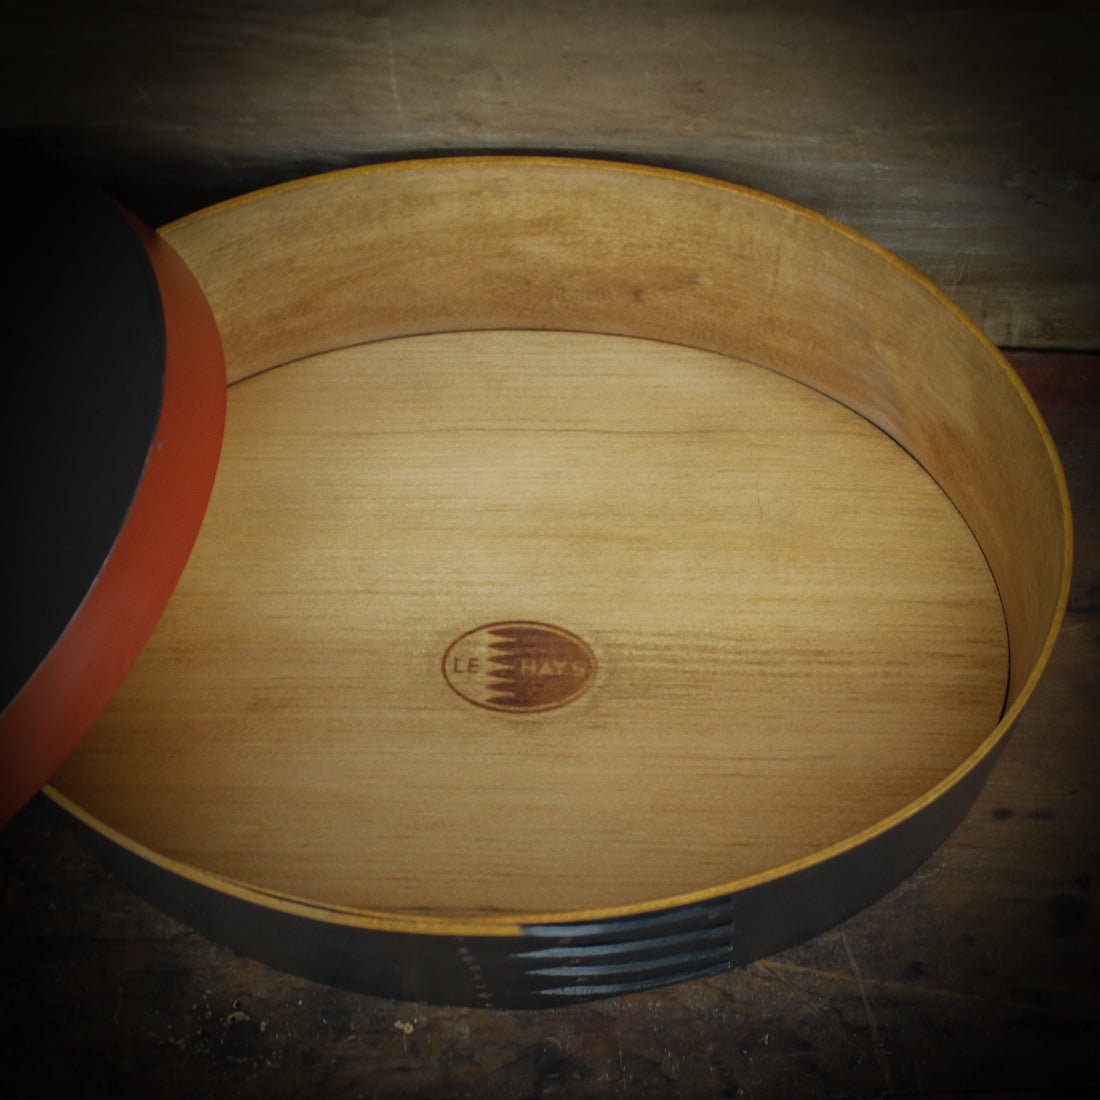 Shaker Oval Box, Size #6, LeHays Shaker Boxes, Handcrafted in Maine.  Interior View